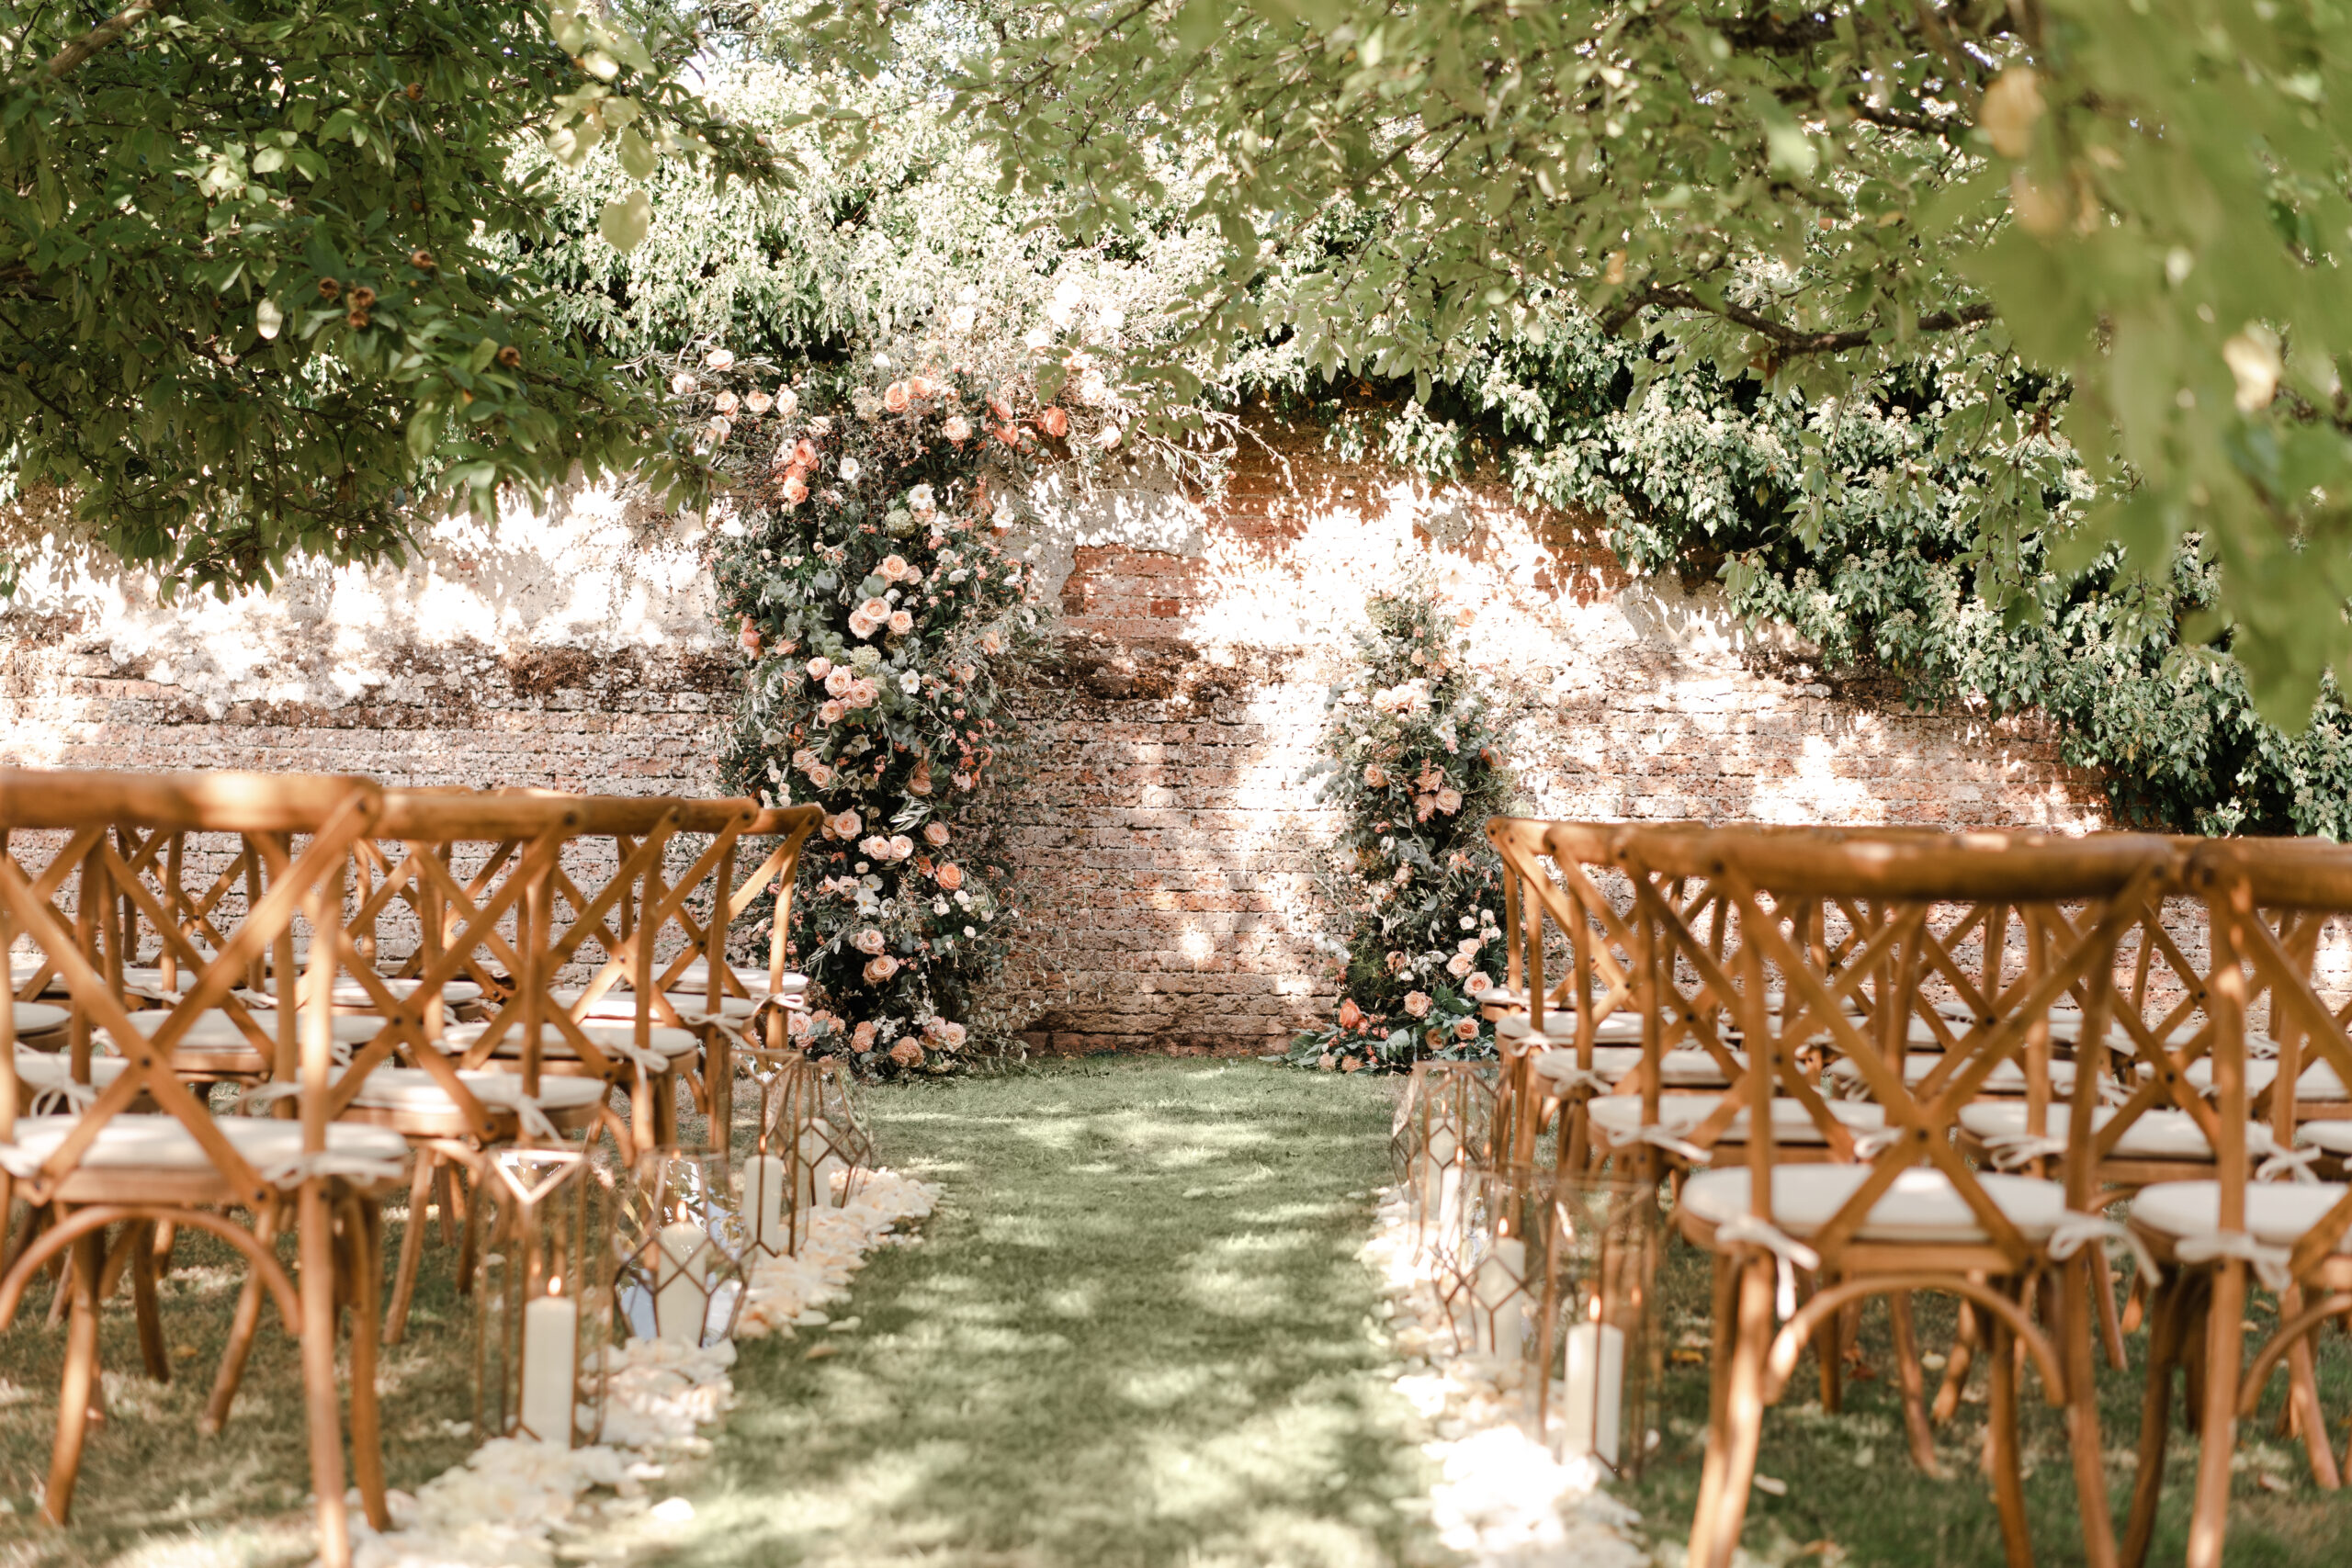 Four Seasons Hampshire Orchard Wedding Ceremony set up with petals and candles lining the aisle and a gorgeous coral and peach asymmetrical floral arch with whimsical greenery marking the end of the aisle